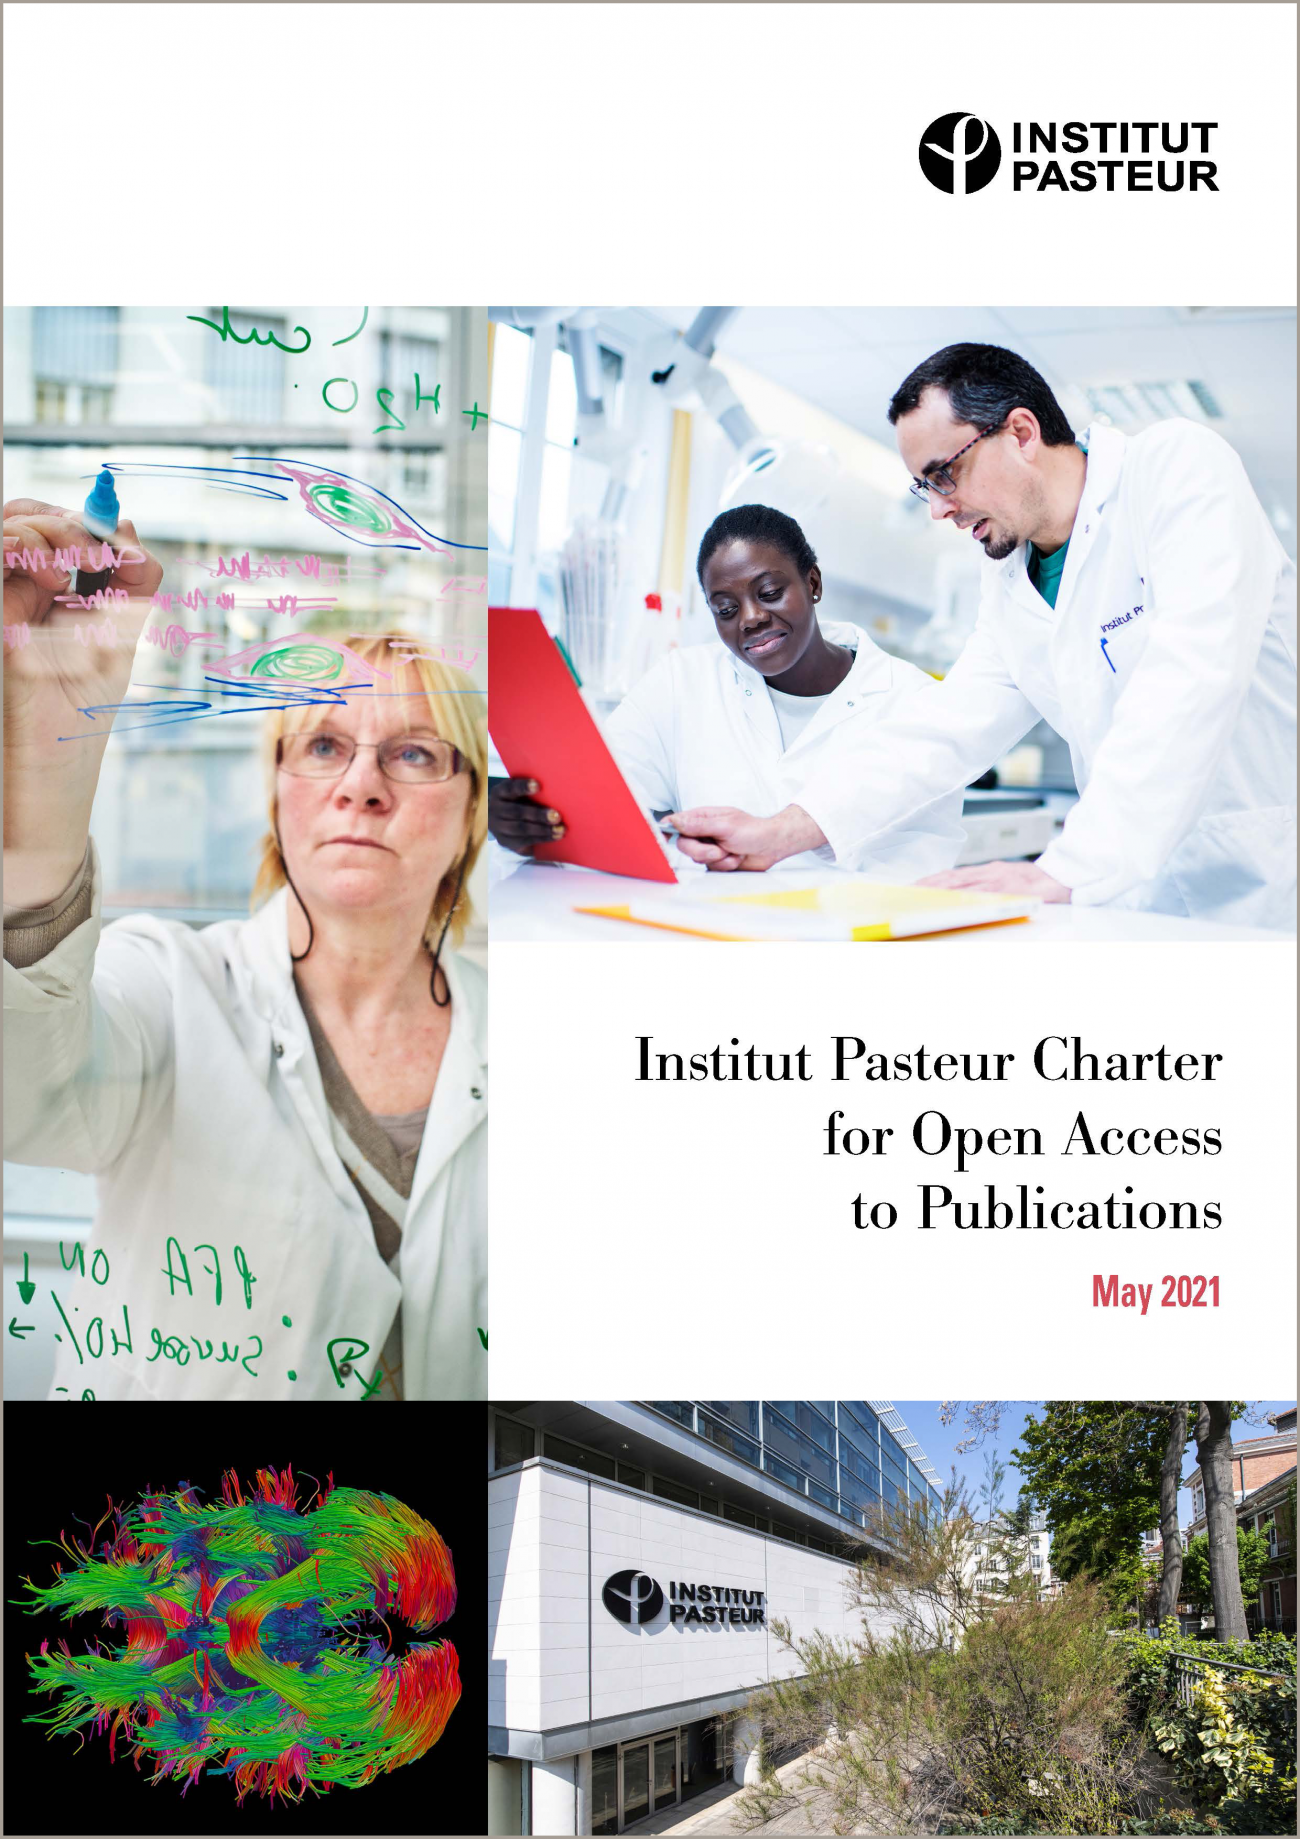 Institut Pasteur - Charter for Open Access to Publications